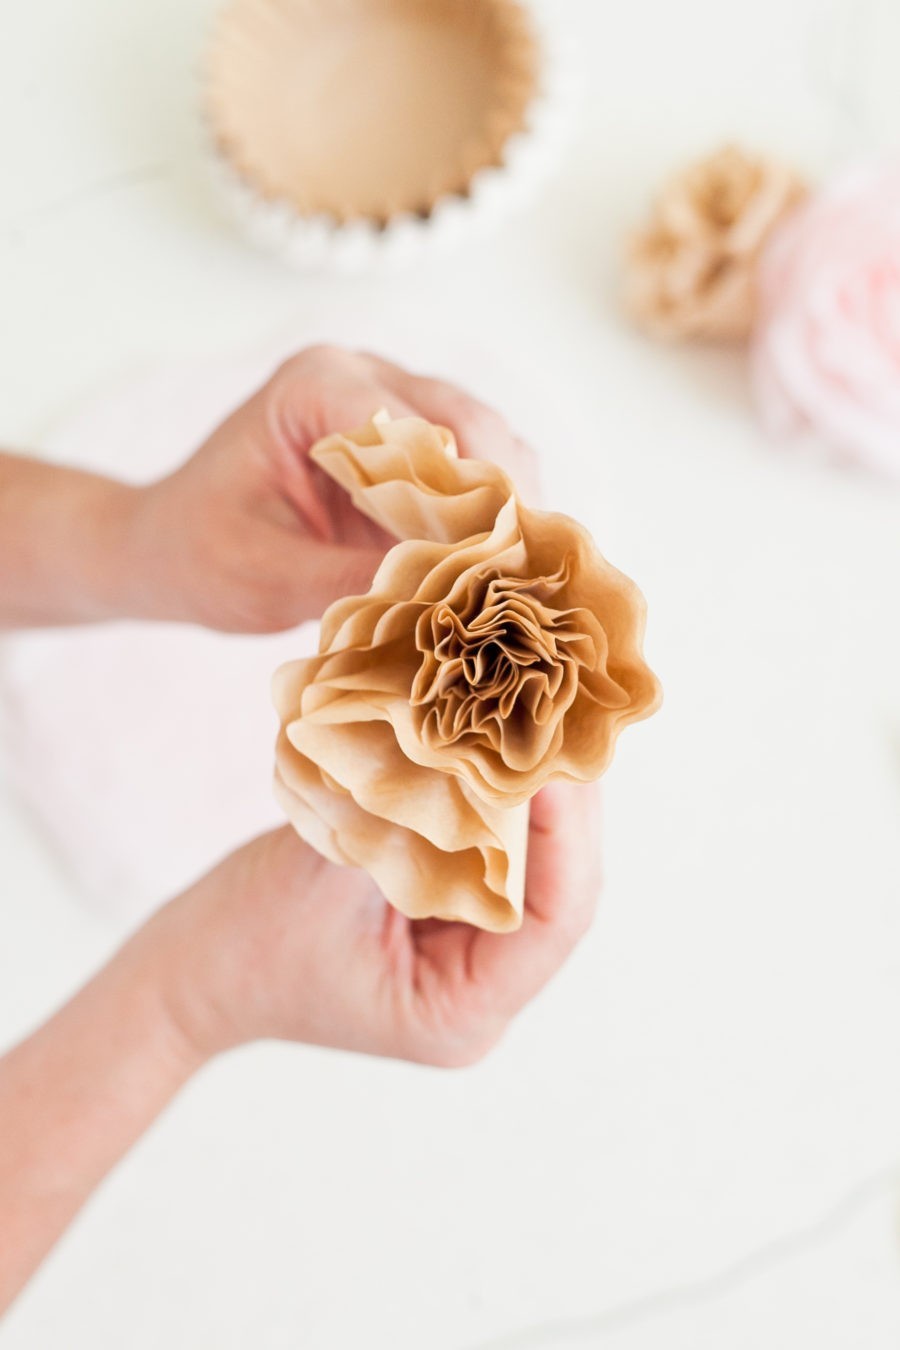 Everyday Summer Tablescapes + How to Make Easy DIY Paper Flowers featured by popular Florida lifestyle blogger Fresh Mommy Blog